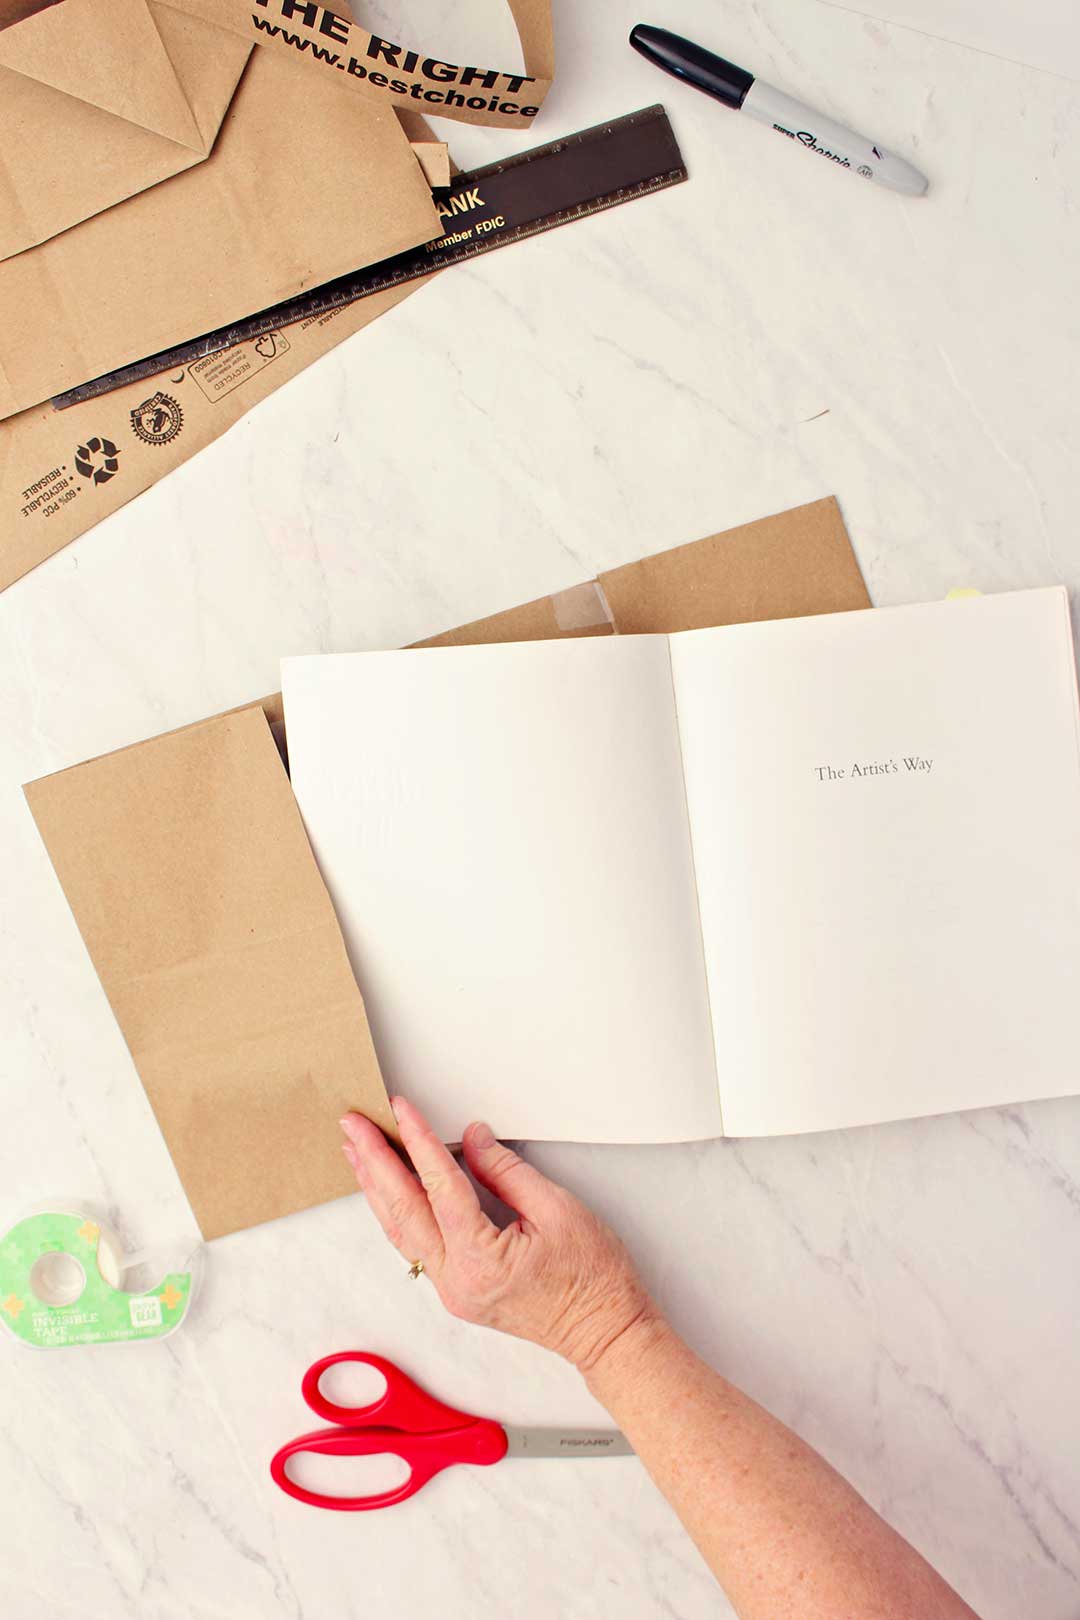 A hand sliding the inside book cover into the paper bag flap.